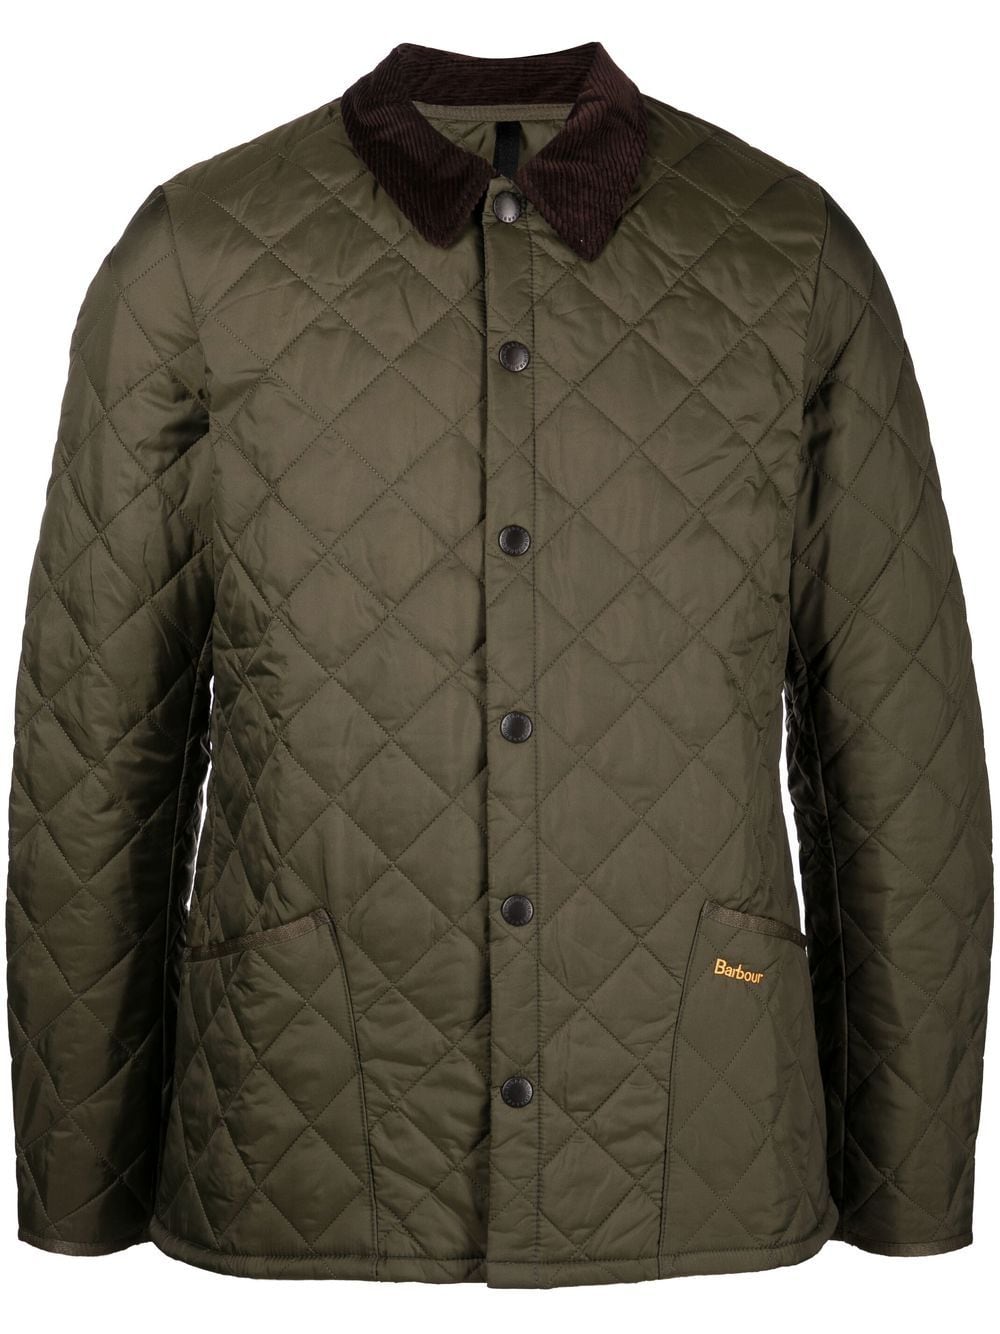 Image 1 of Barbour quilted shirt jacket